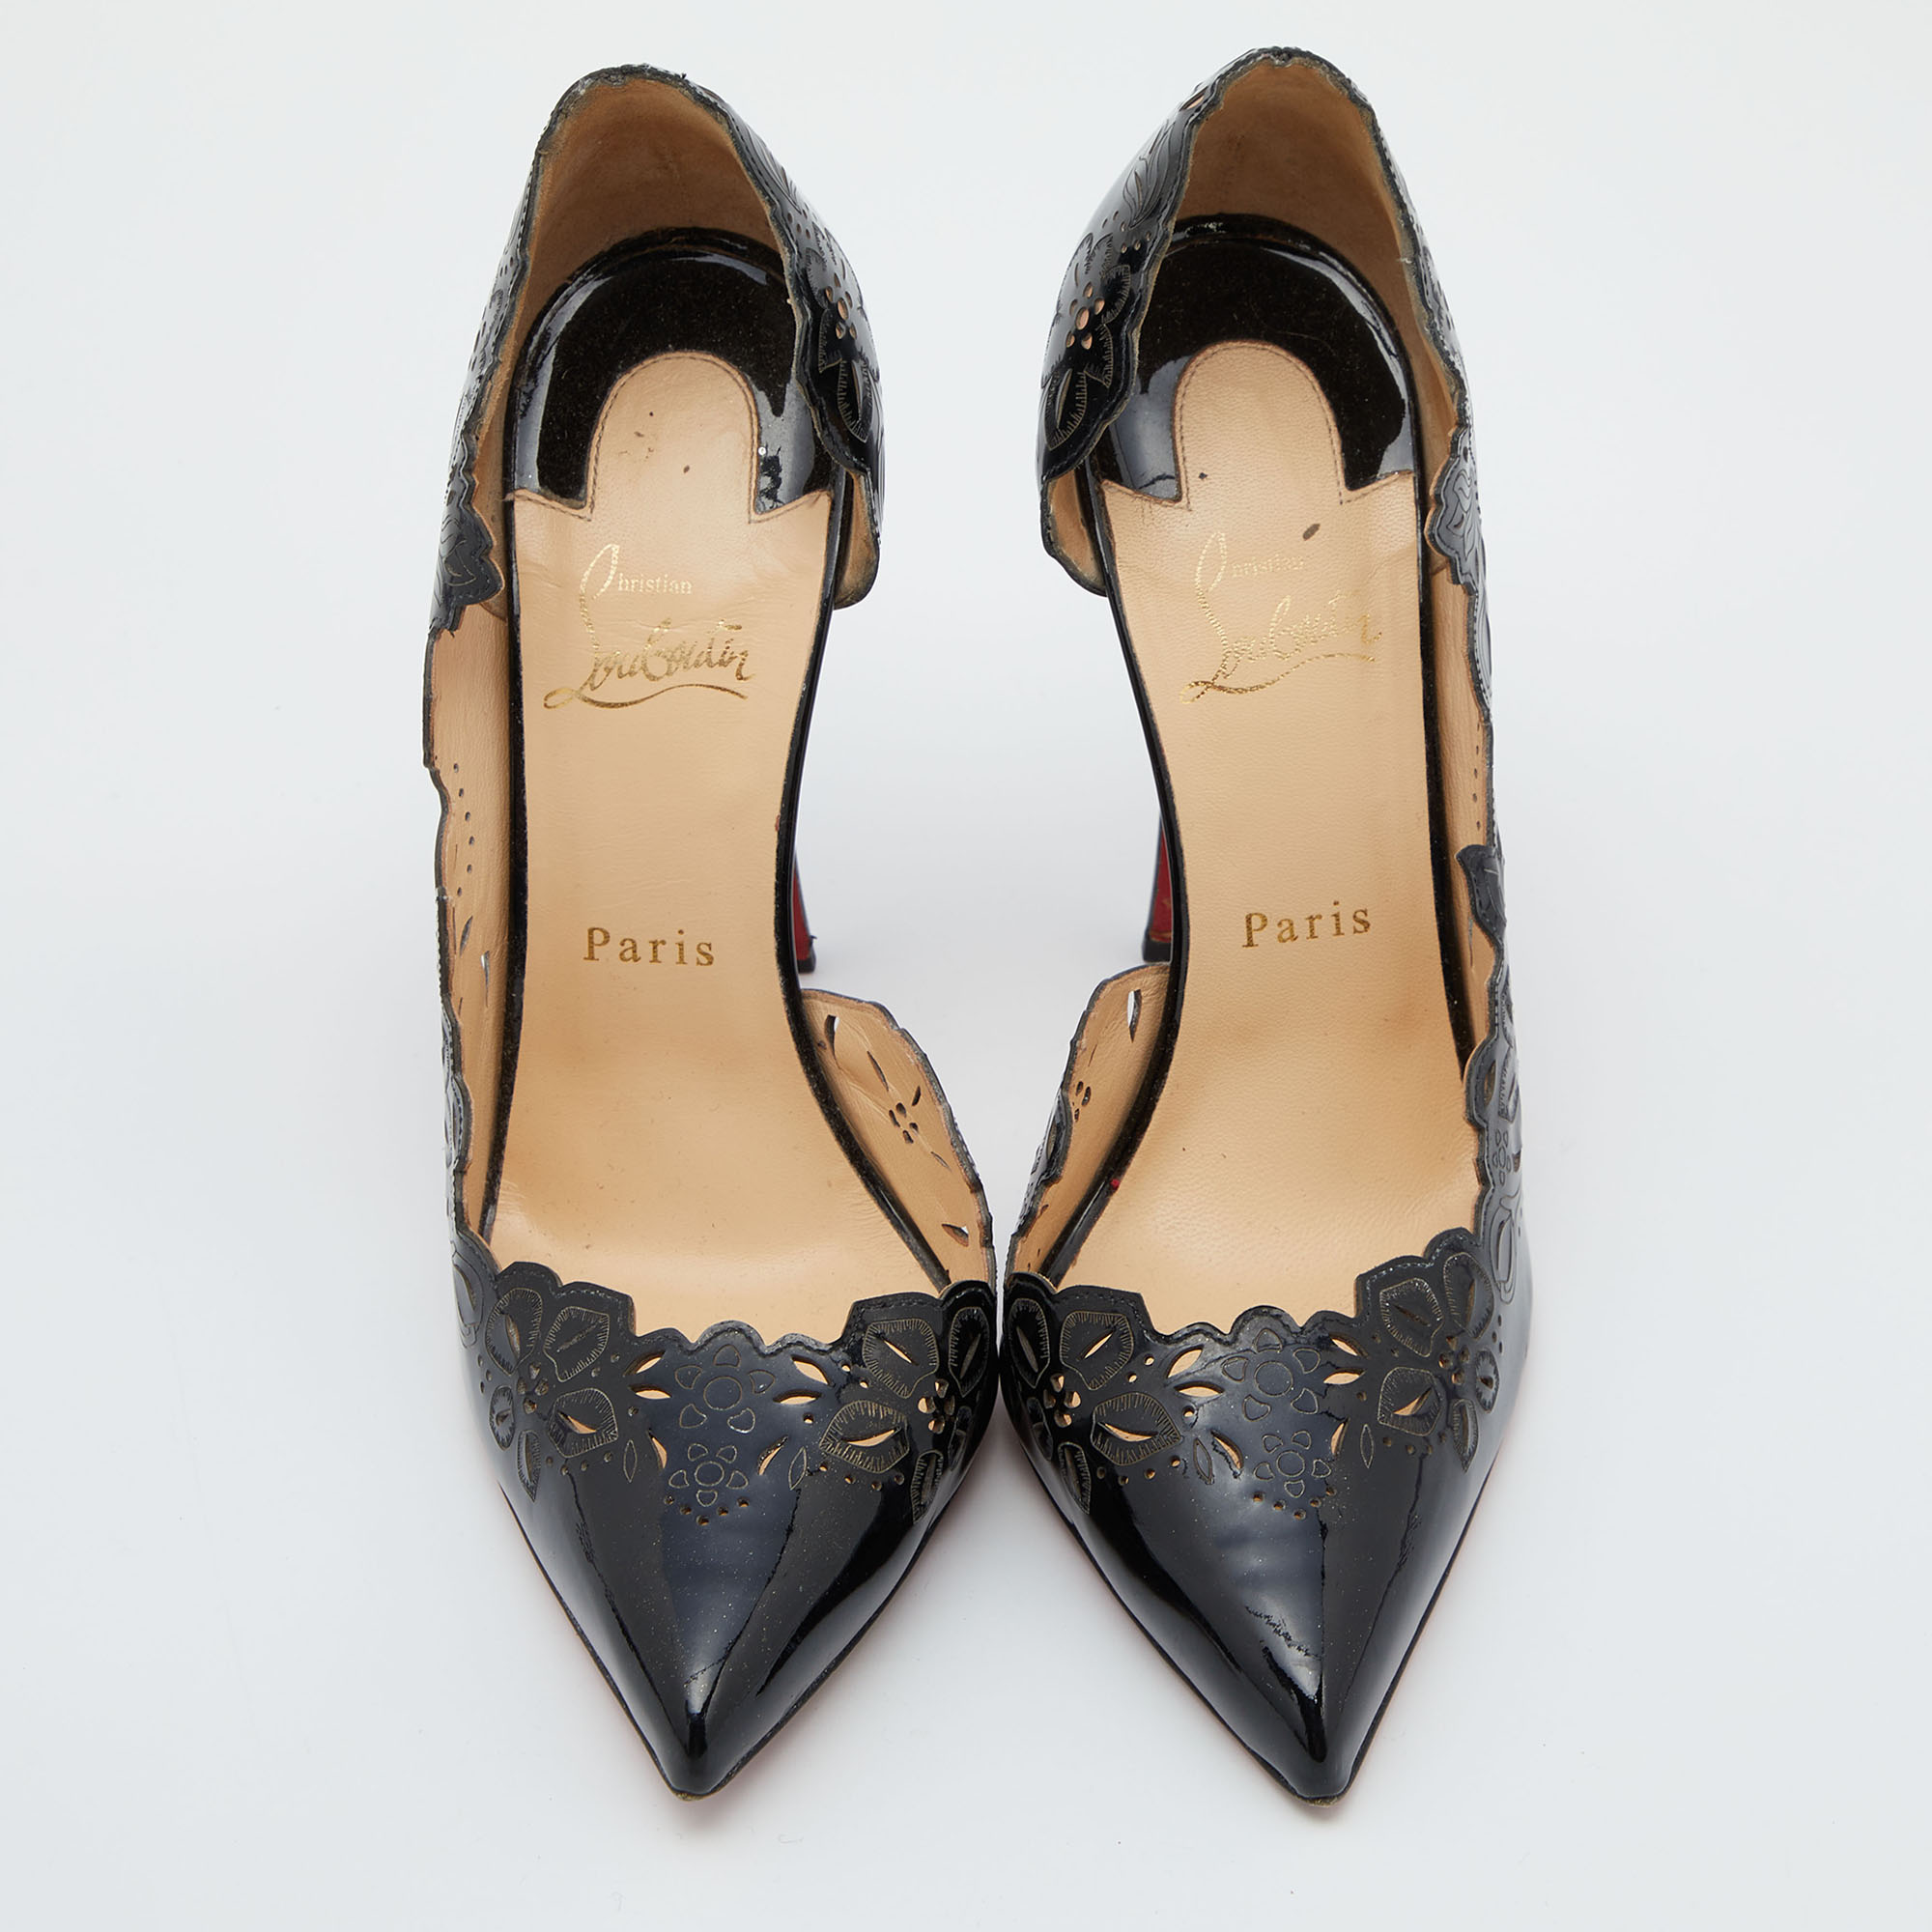 Christian Louboutin Black Patent Leather Beloved Pumps Size 40